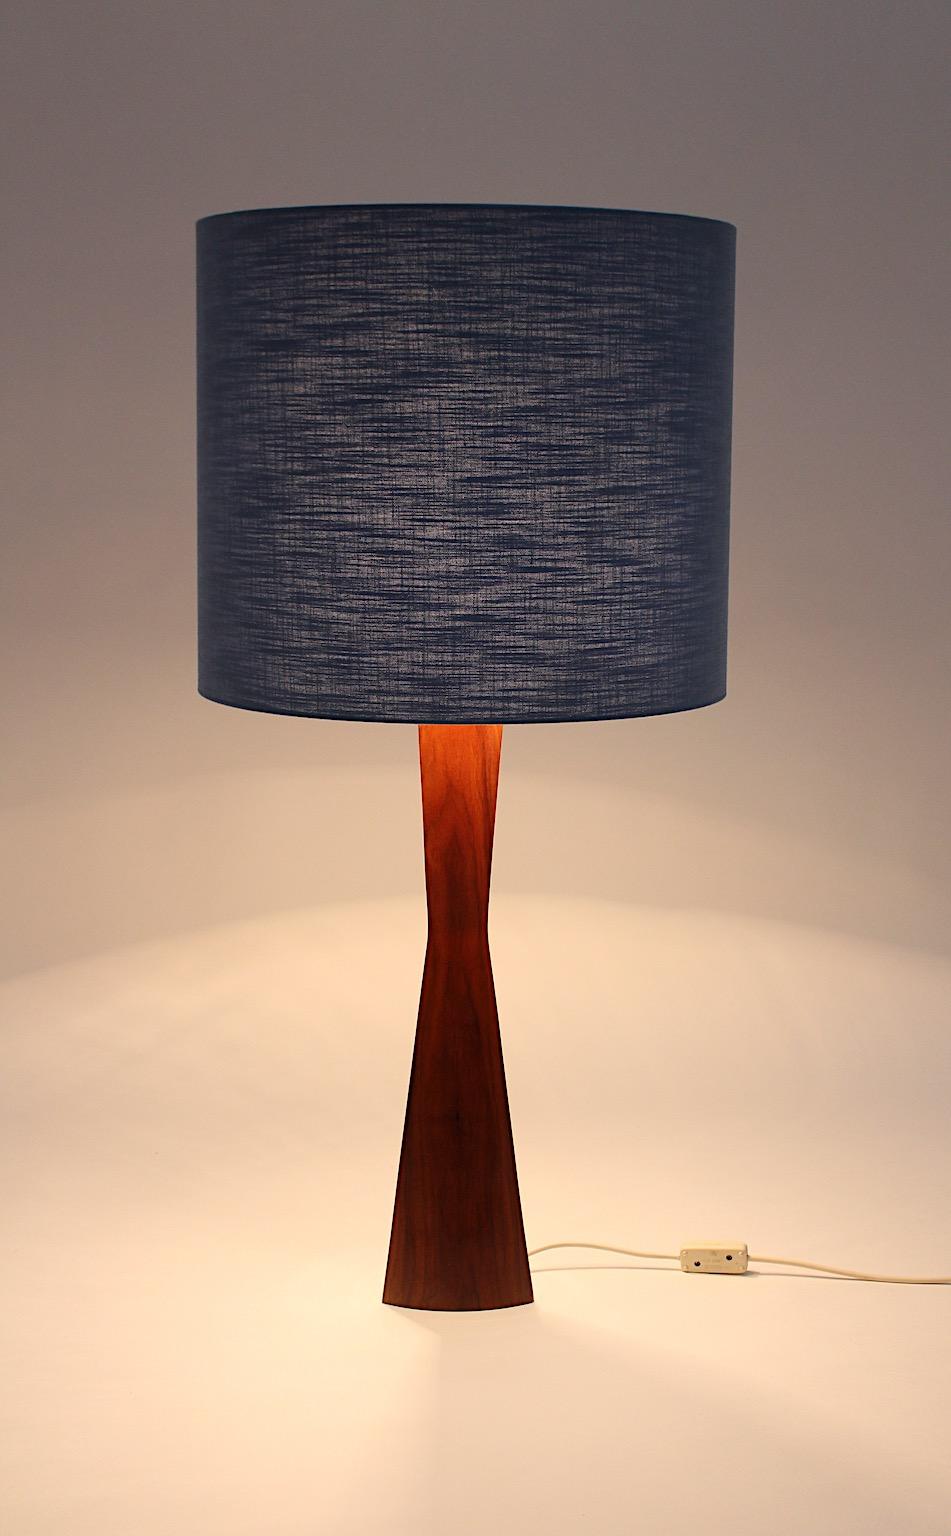 Scandinavian Modern Vintage Teak Table Lamp Blue Lampshade, 1960s, Denmark In Good Condition For Sale In Vienna, AT